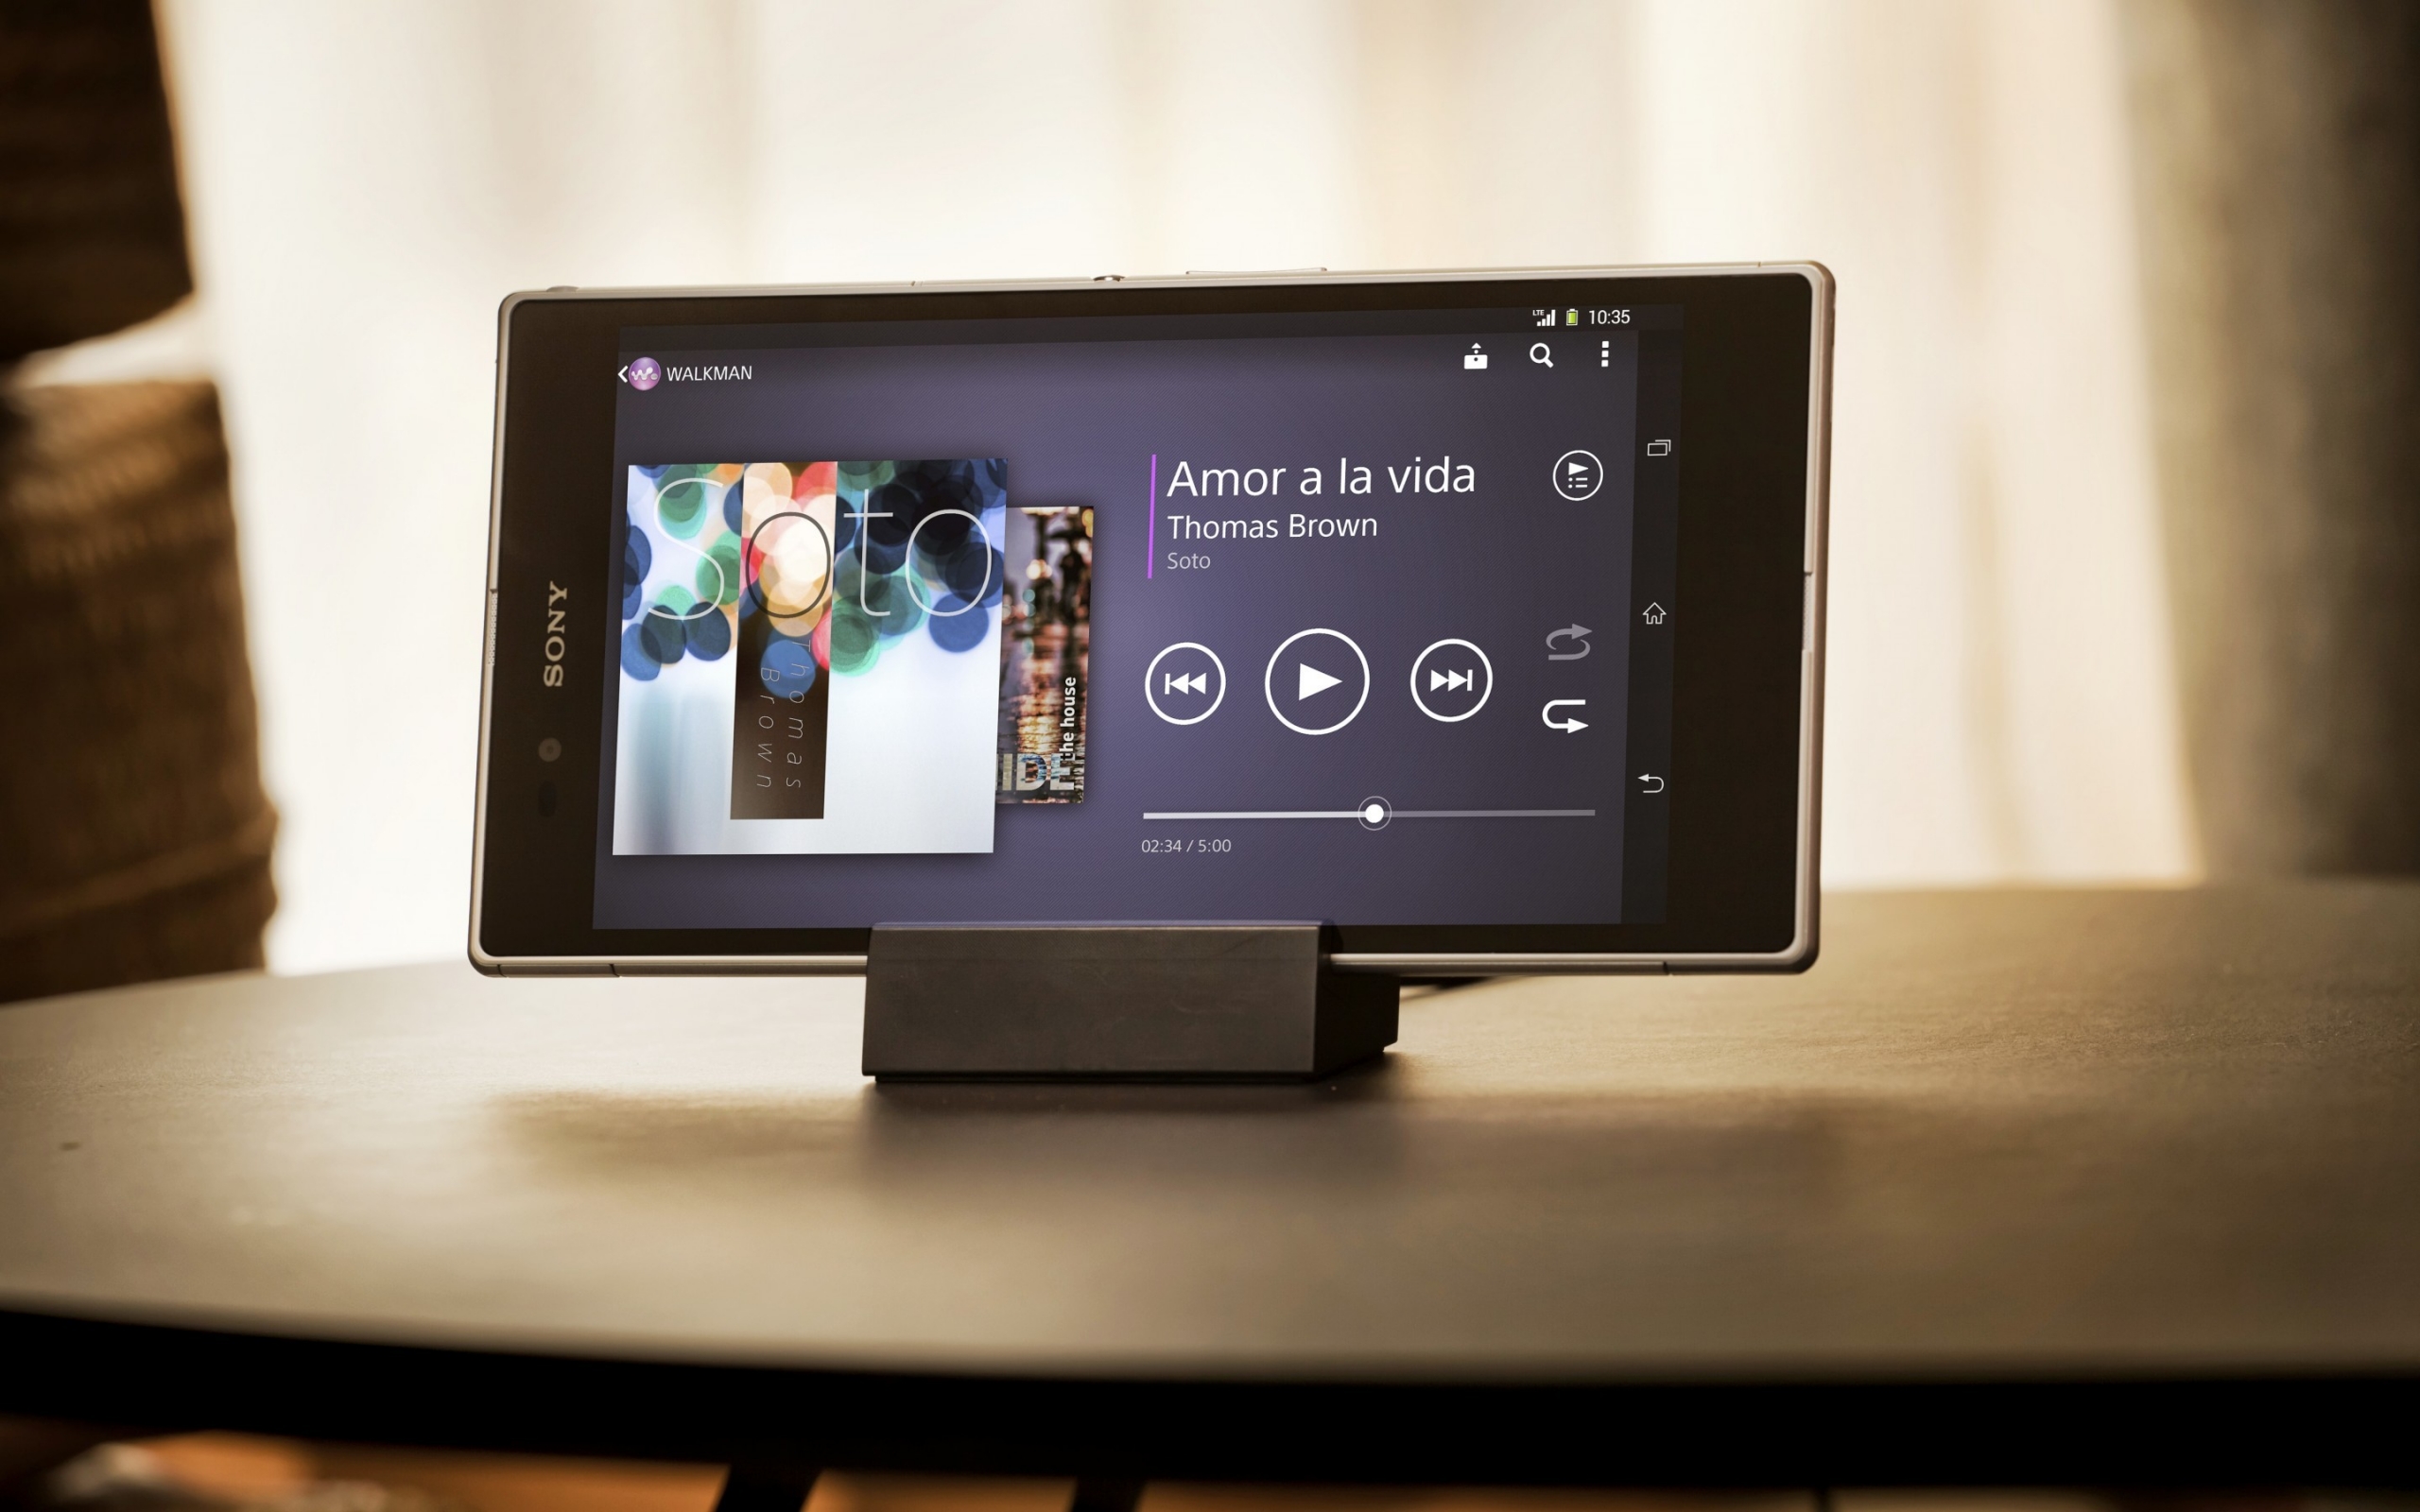 Sony Xperia Z Ultra for 2560 x 1600 widescreen resolution